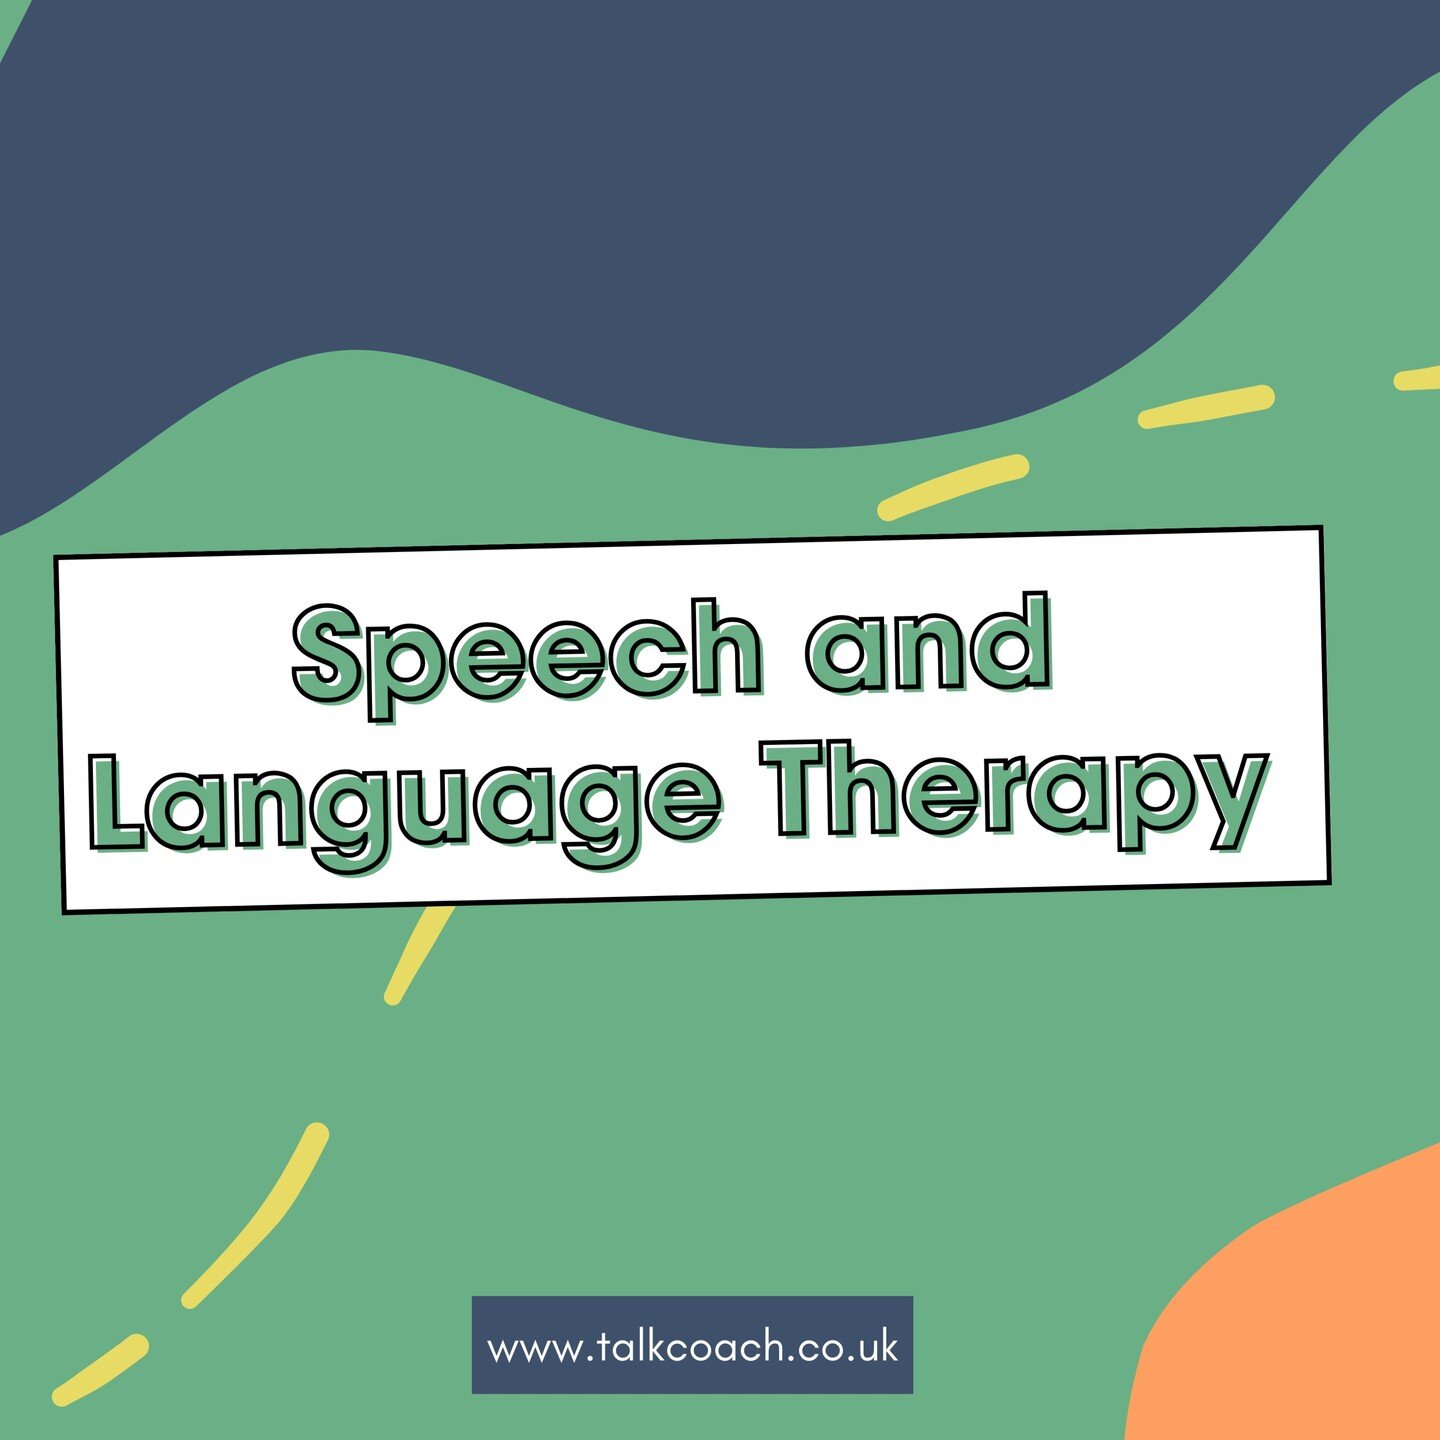 ✨ Speech and Language Therapy ✨

Hello! I&rsquo;m Kezia, I&rsquo;m an experienced Speech and Language Therapist &ndash; I&rsquo;ve spent the past 12 years helping people with their communication and swallowing in a range of hospital, rehabilitation a